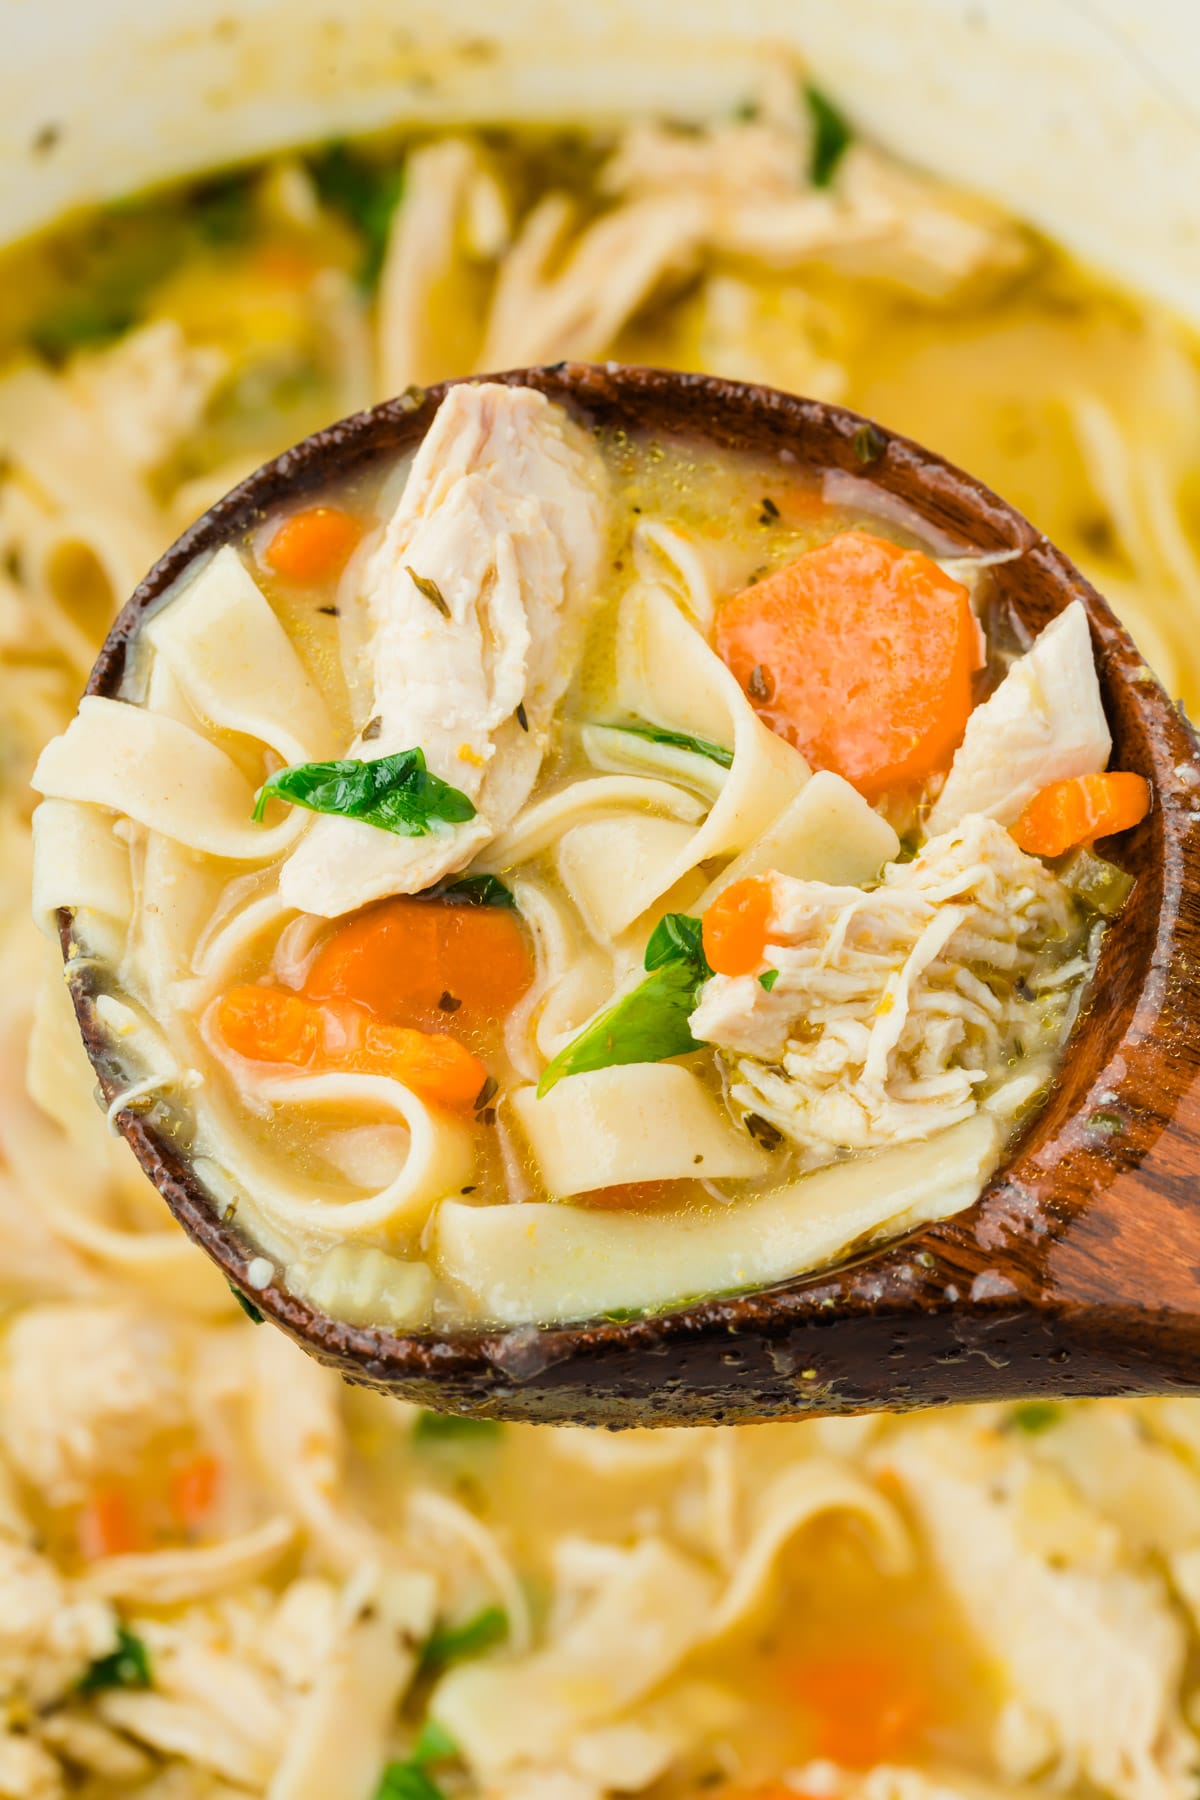 A spoonful of gluten-free chicken noodle soup.